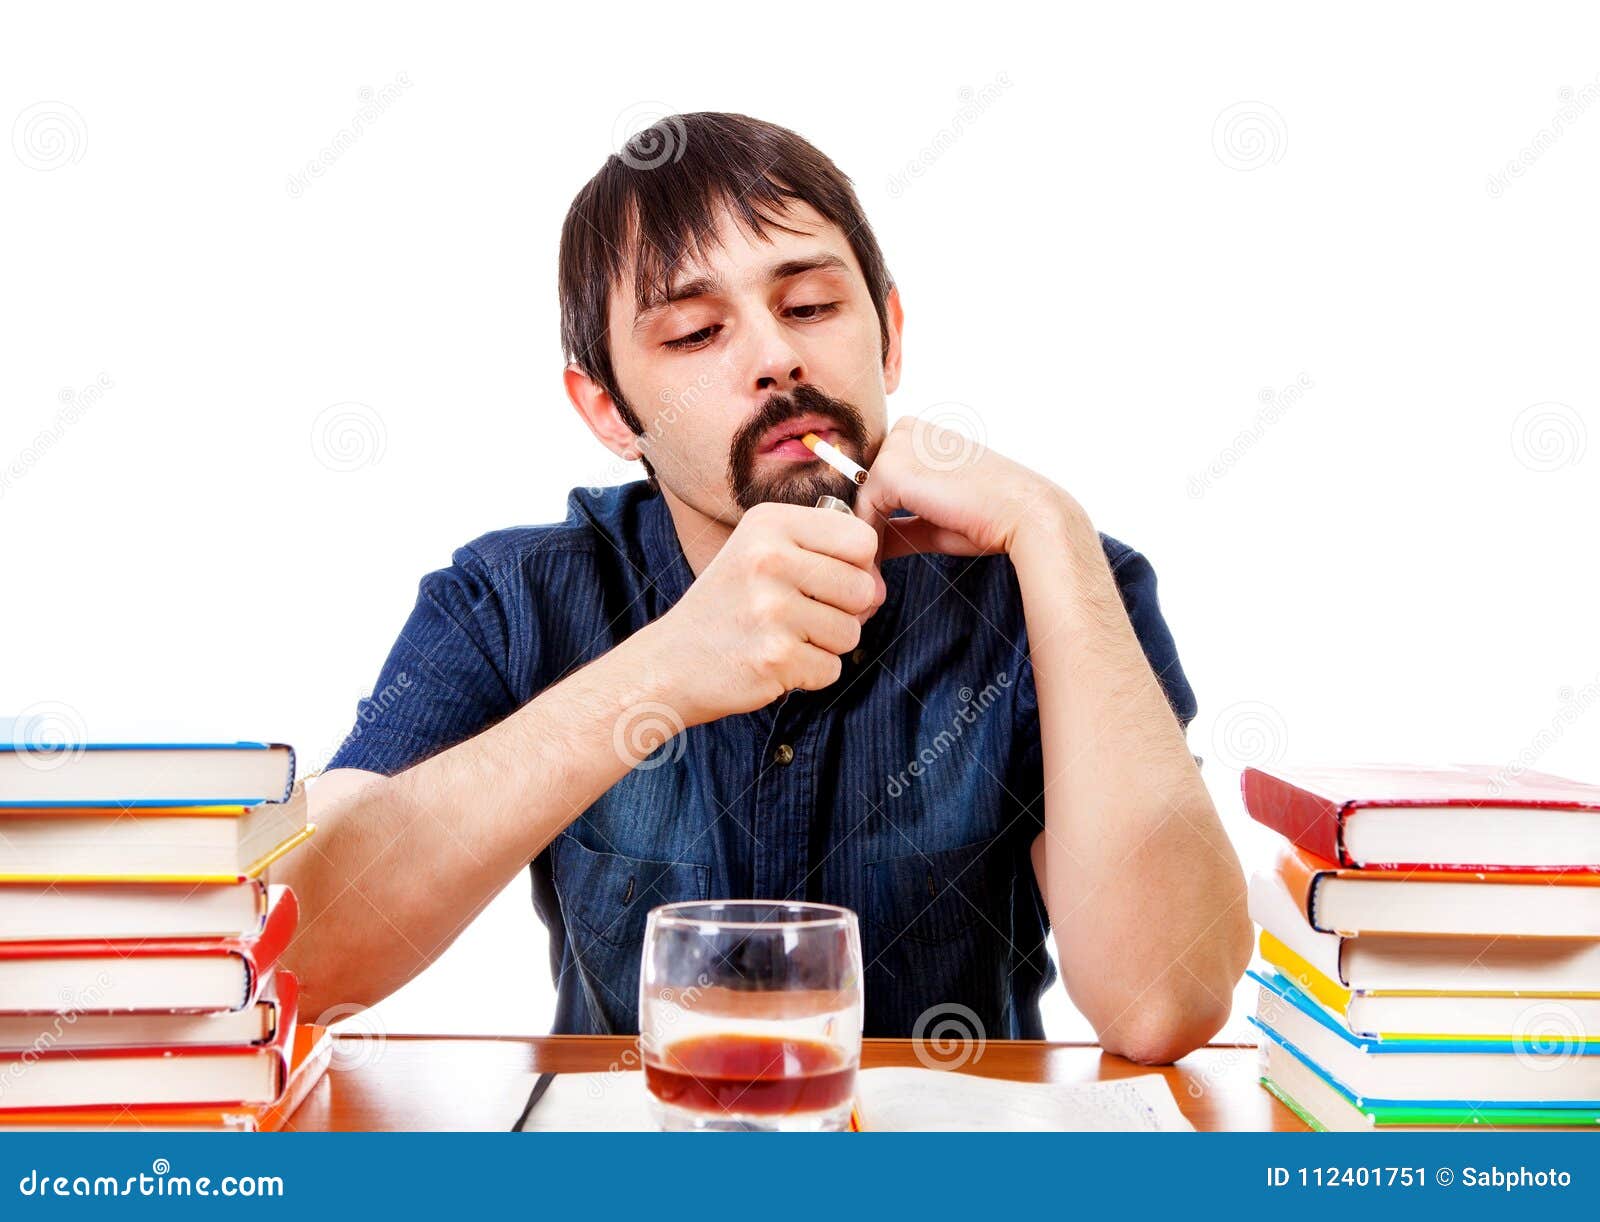 Student with a Cigarette stock image. Image of hold - 112401751